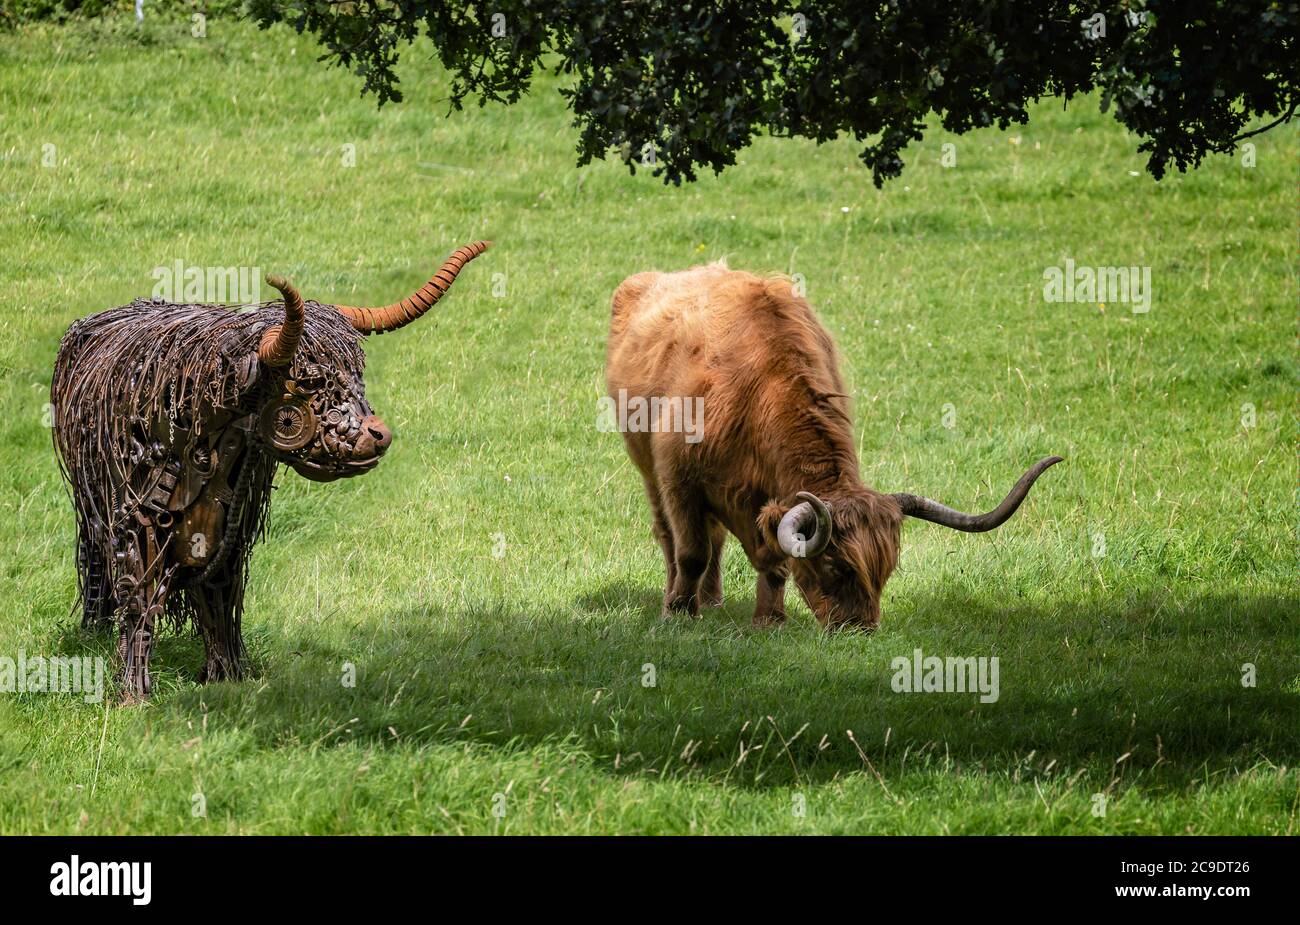 Life size metal sculpture of Highland long horn cow alongside a real Highland cow in a field in Somerset, UK Stock Photo